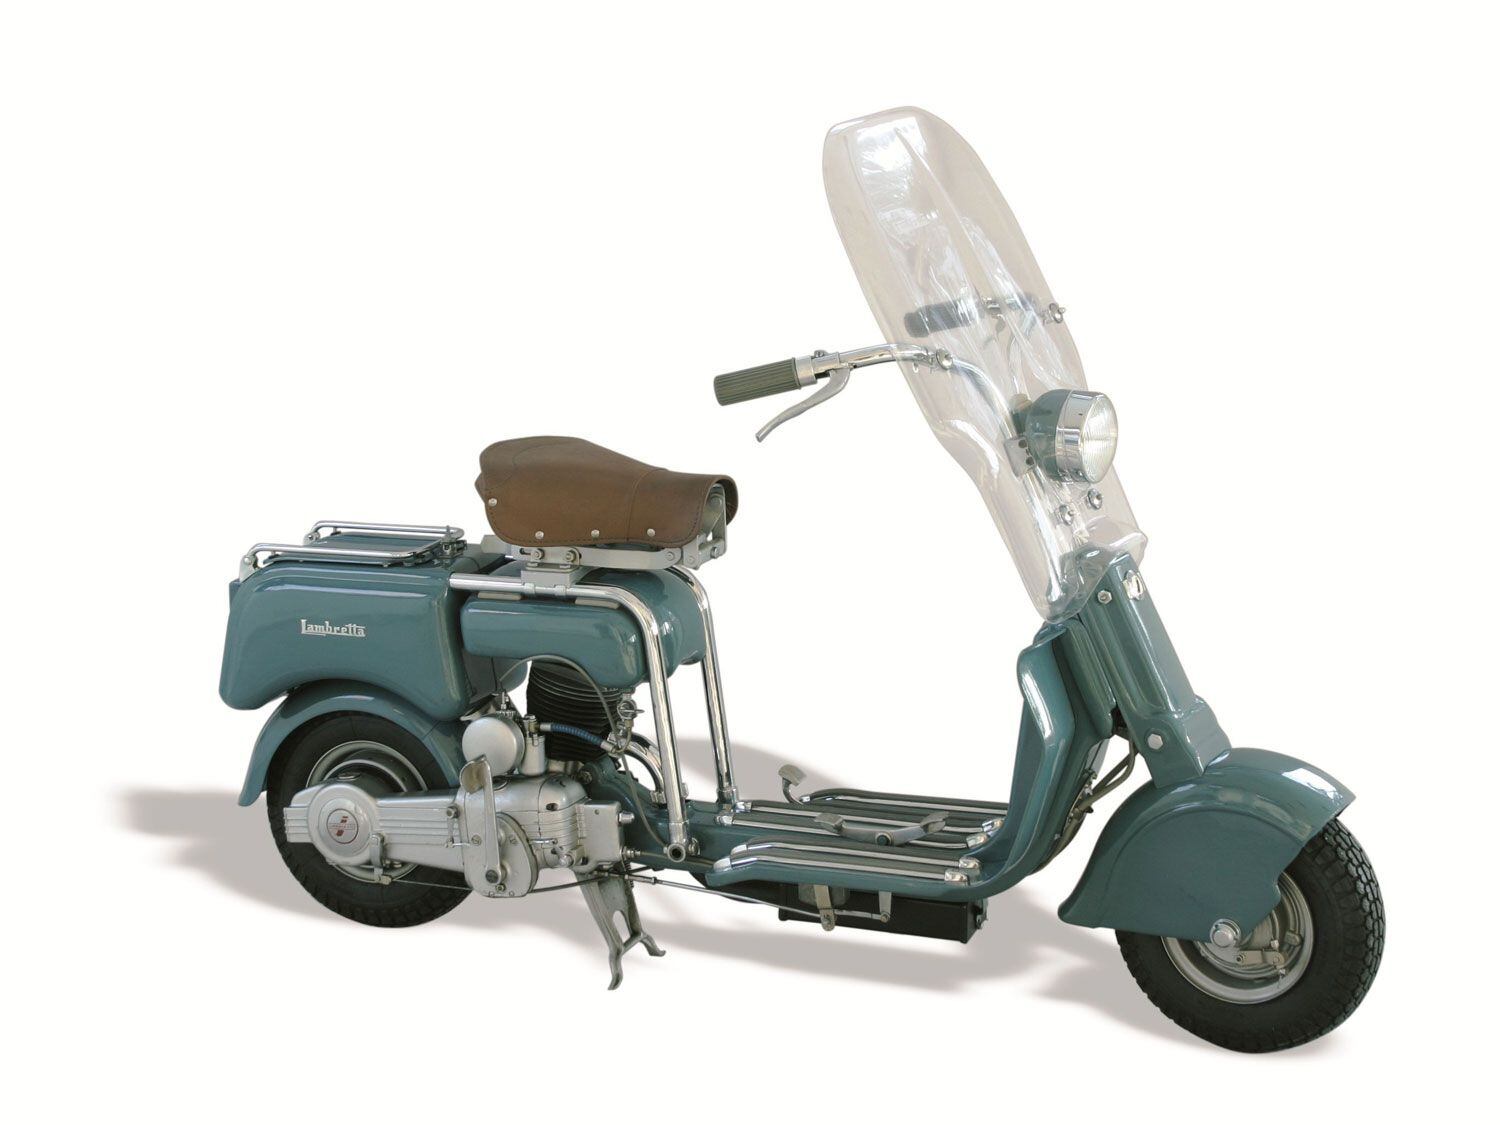 The scooter that started it all, the original Lambretta 125. Together with Vespa, these machines put Italy back in motion in the aftermath of World War II.